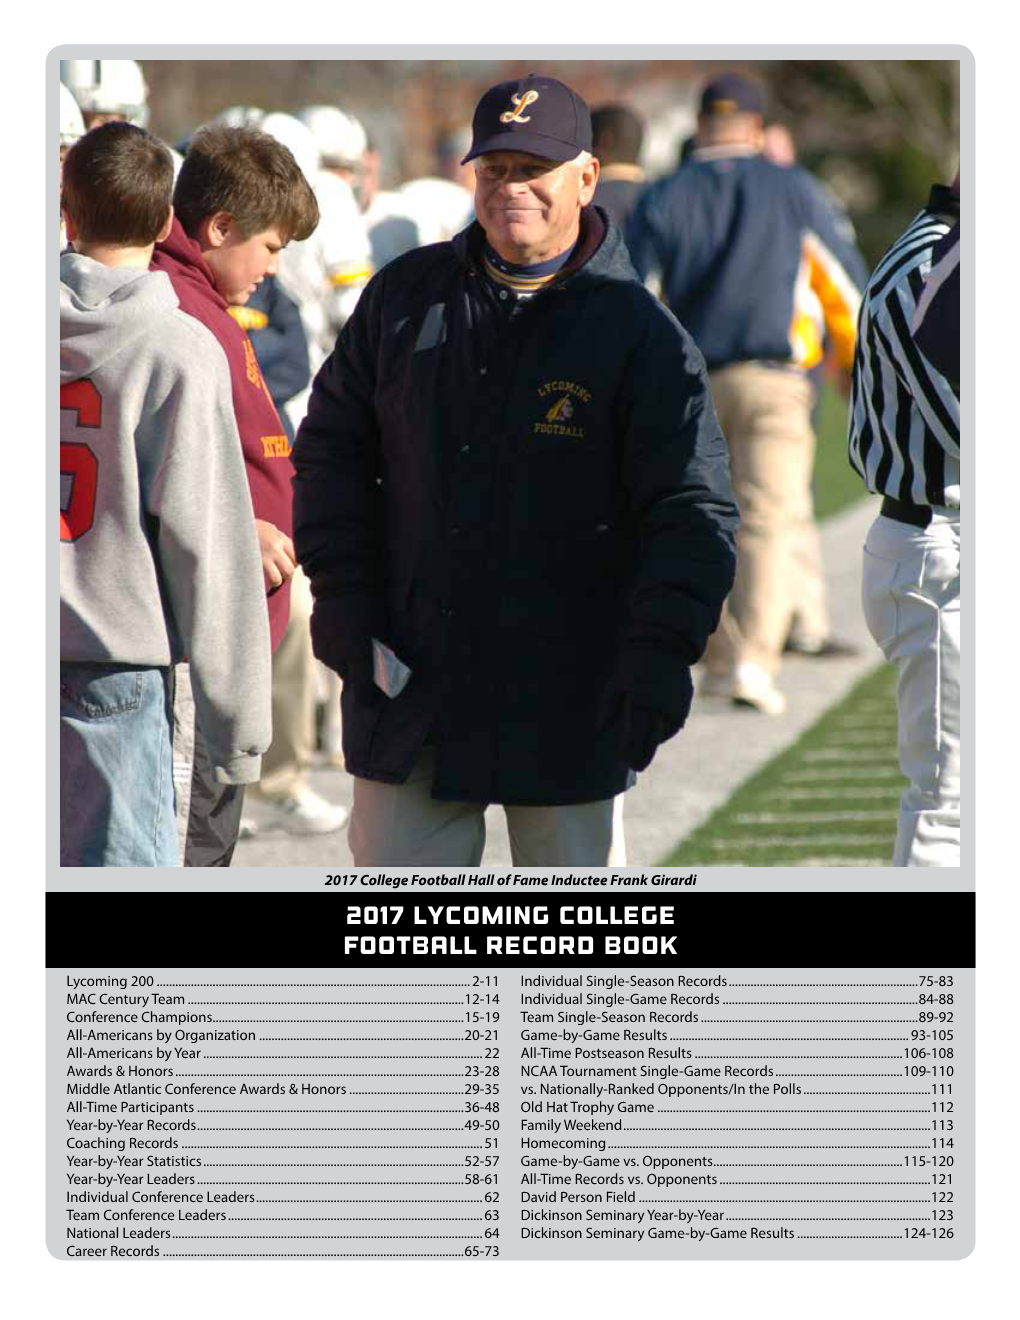 2017 Lycoming College Football Record Book Lycoming 200